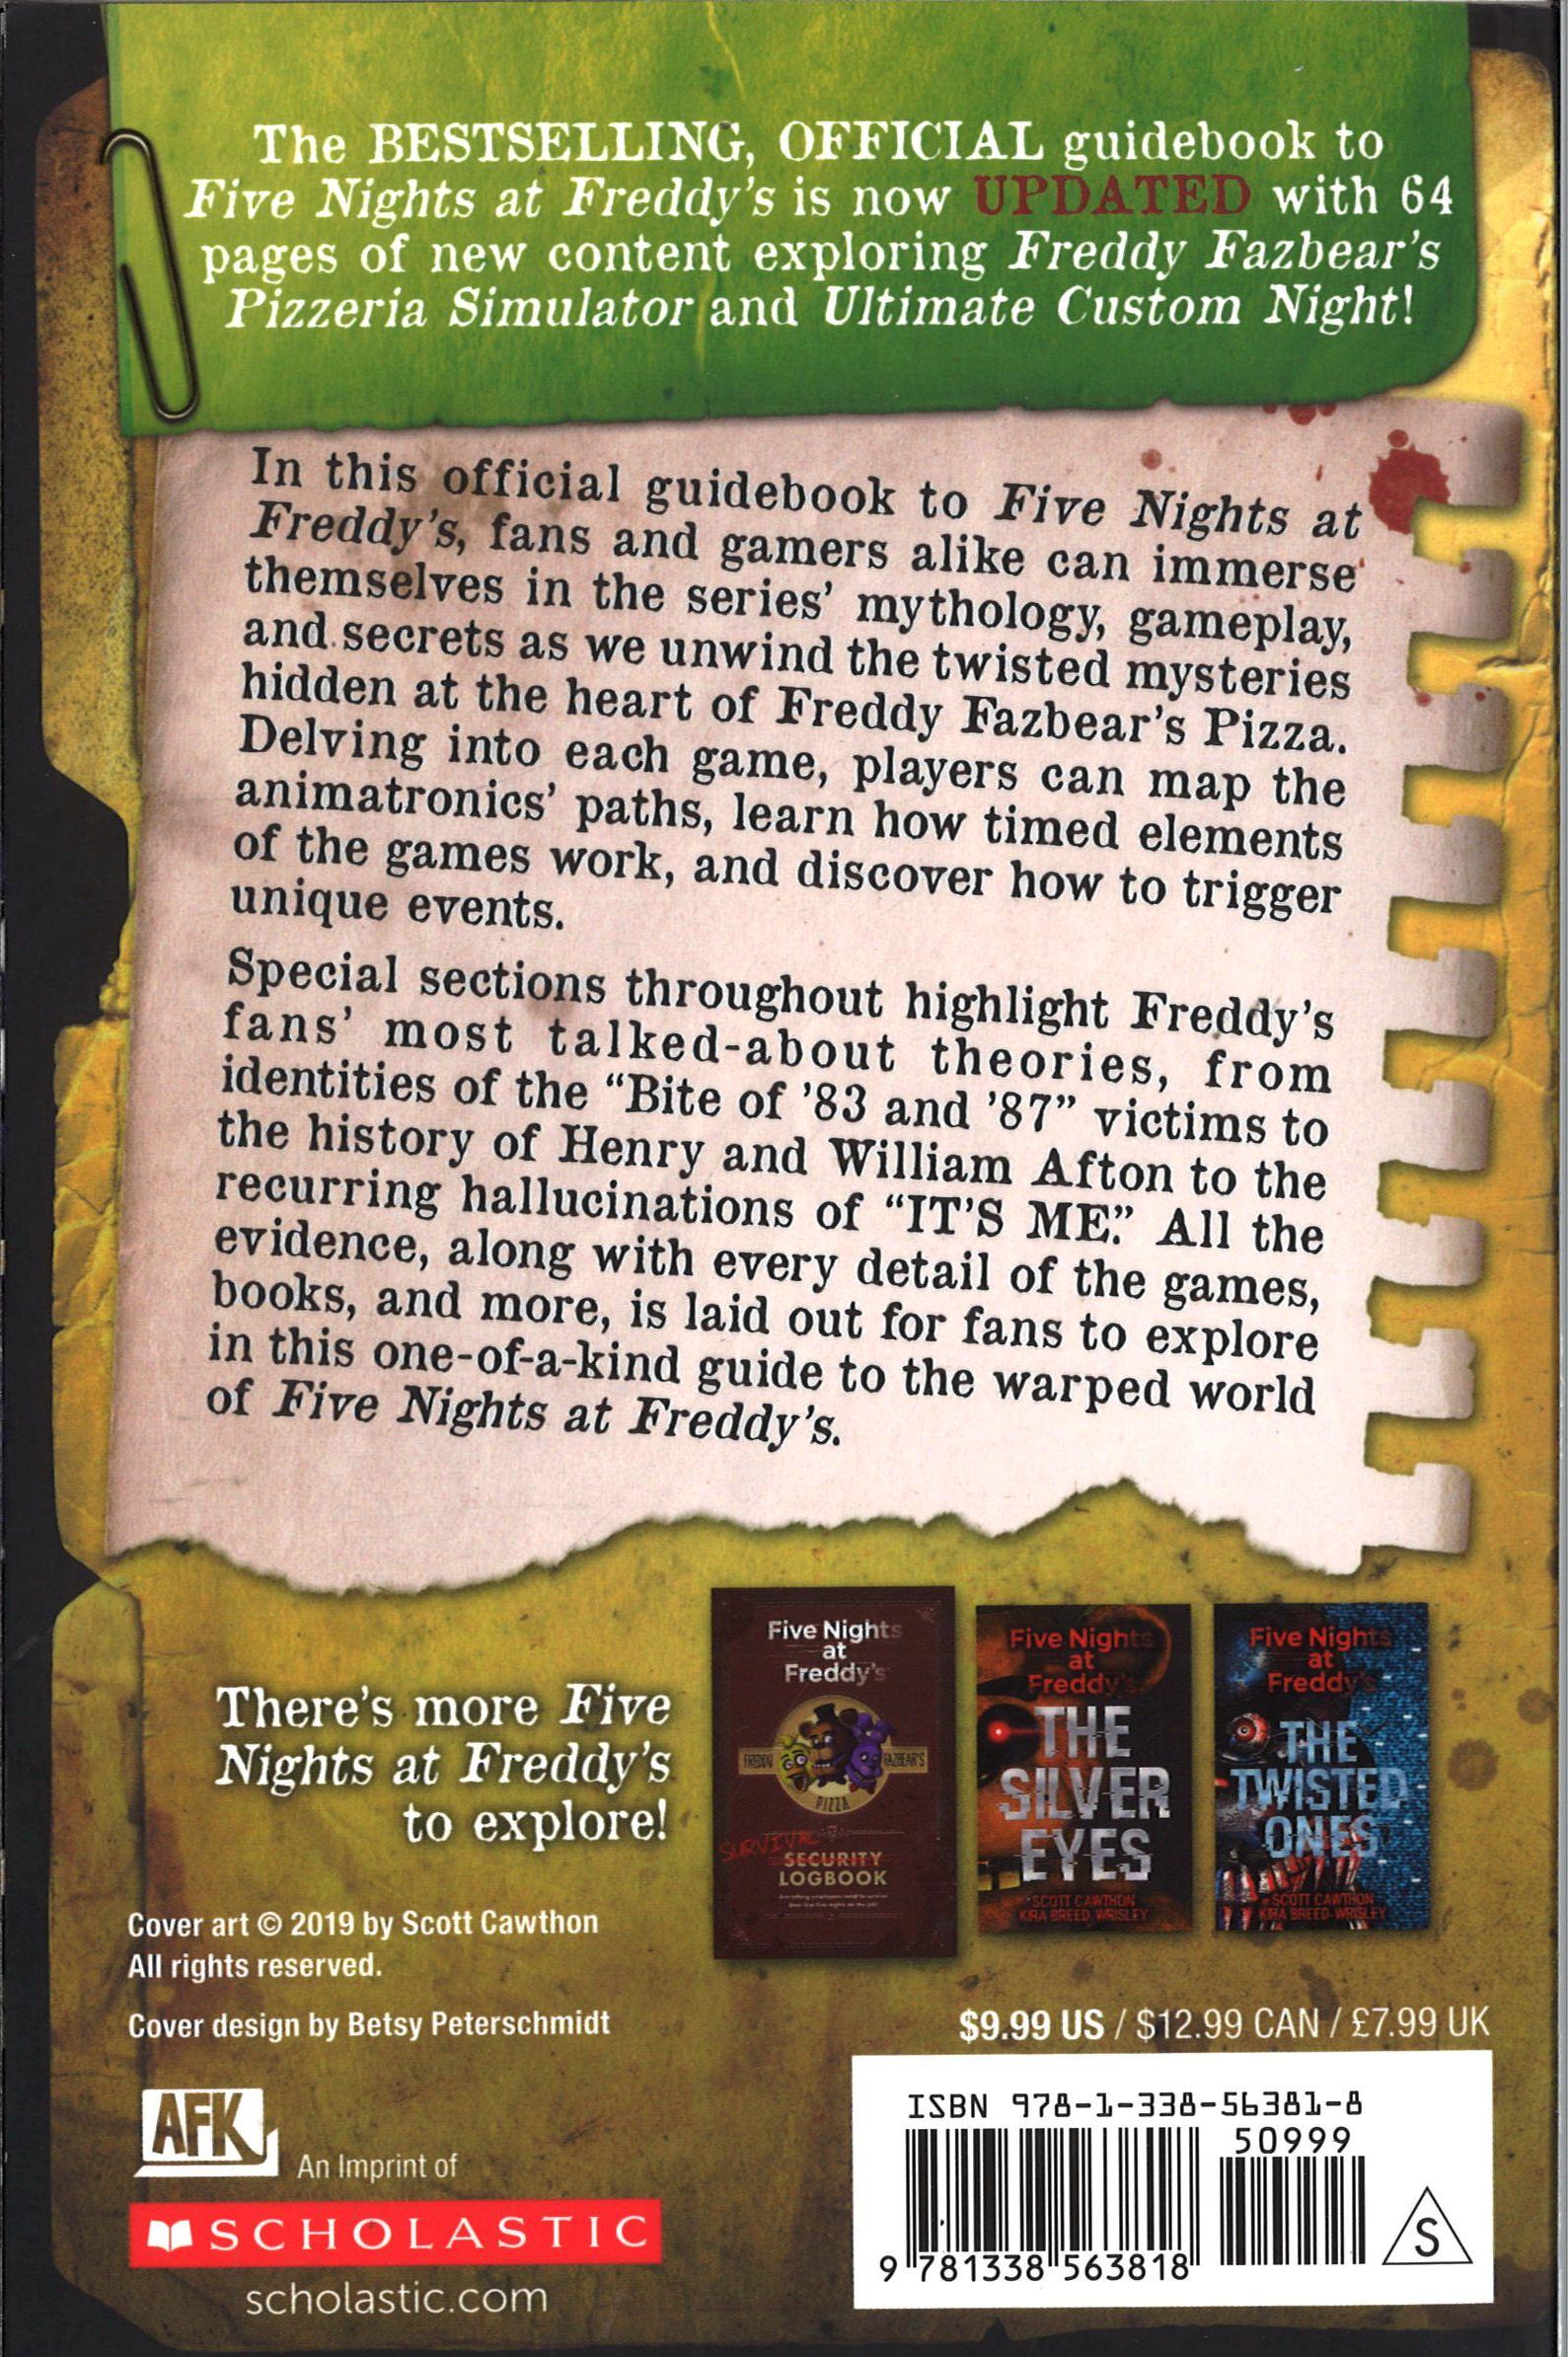 The Freddy Files: An AFK Book (Five Nights at Freddy's)